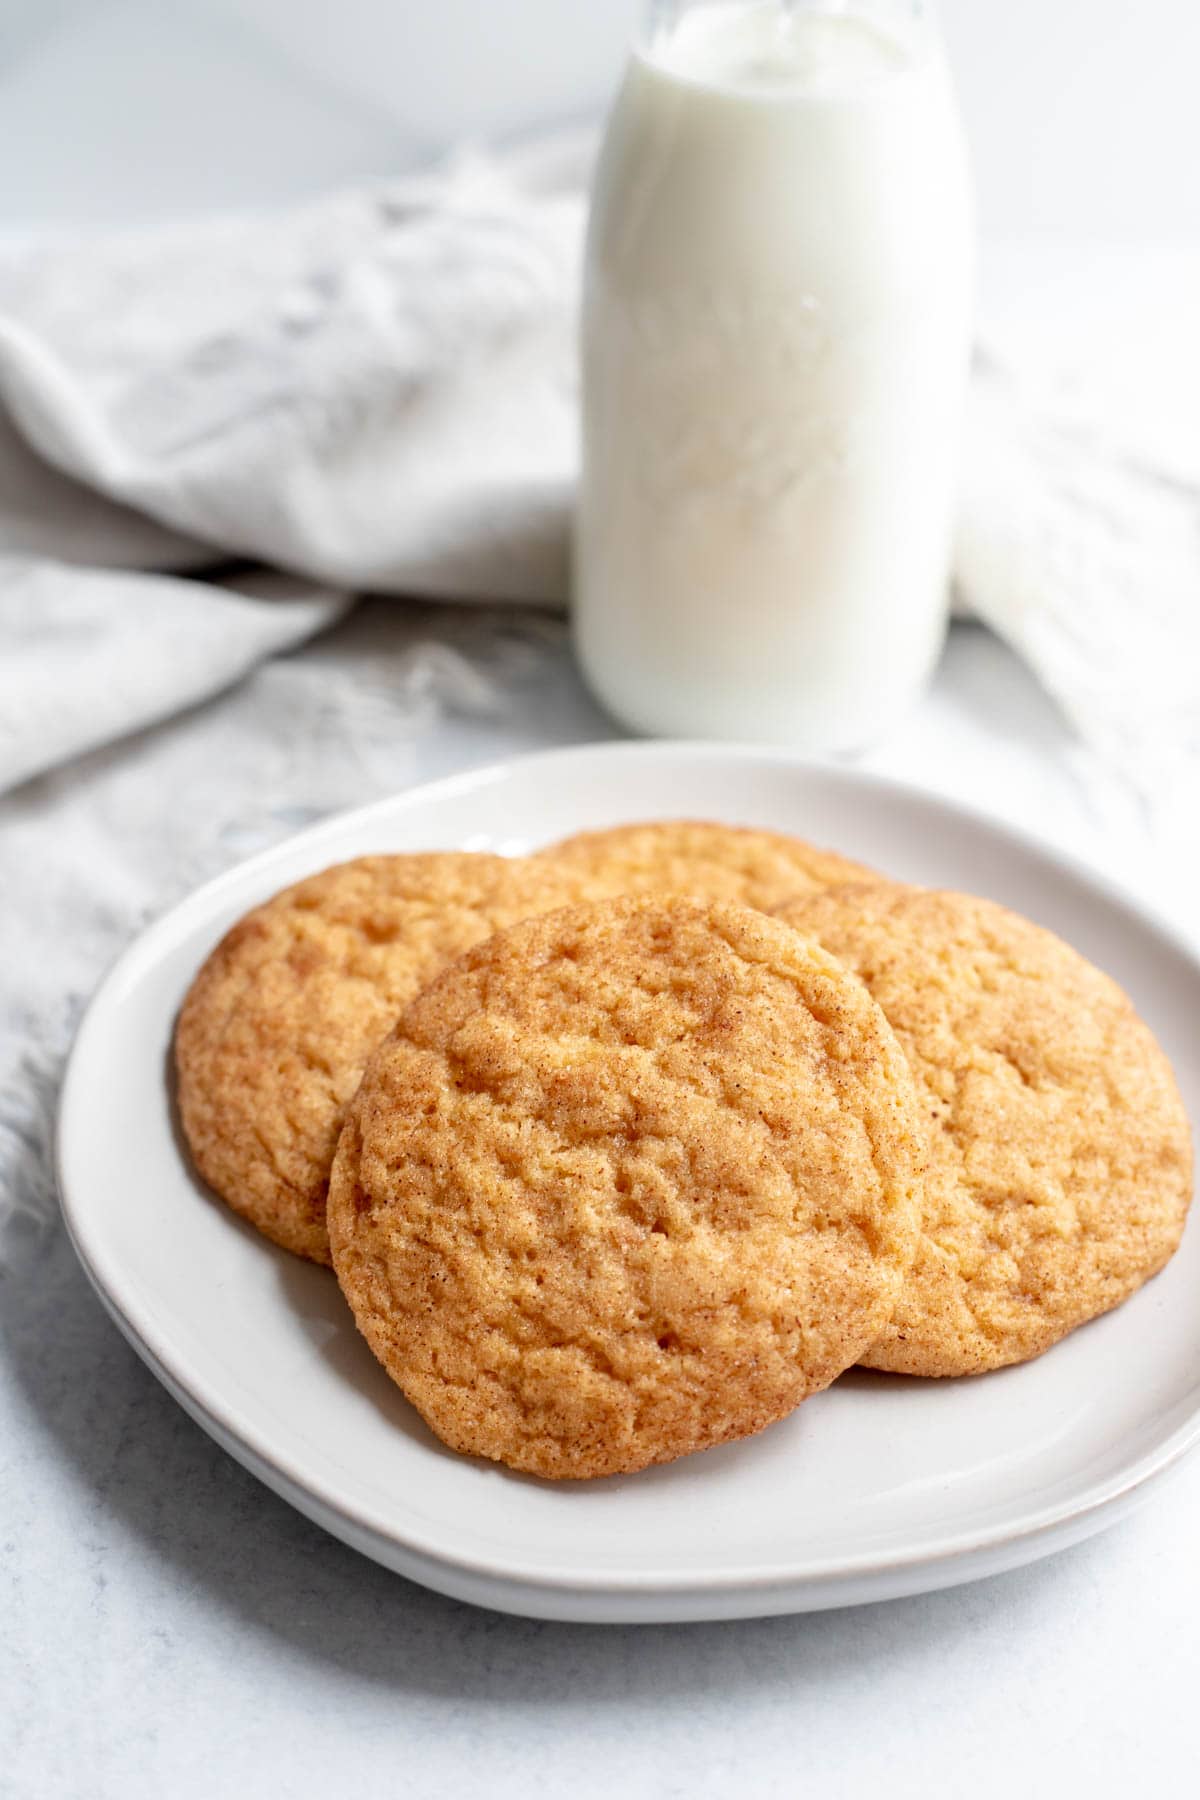 Plate of vegan snickerdoodles in front of a glass of milk 